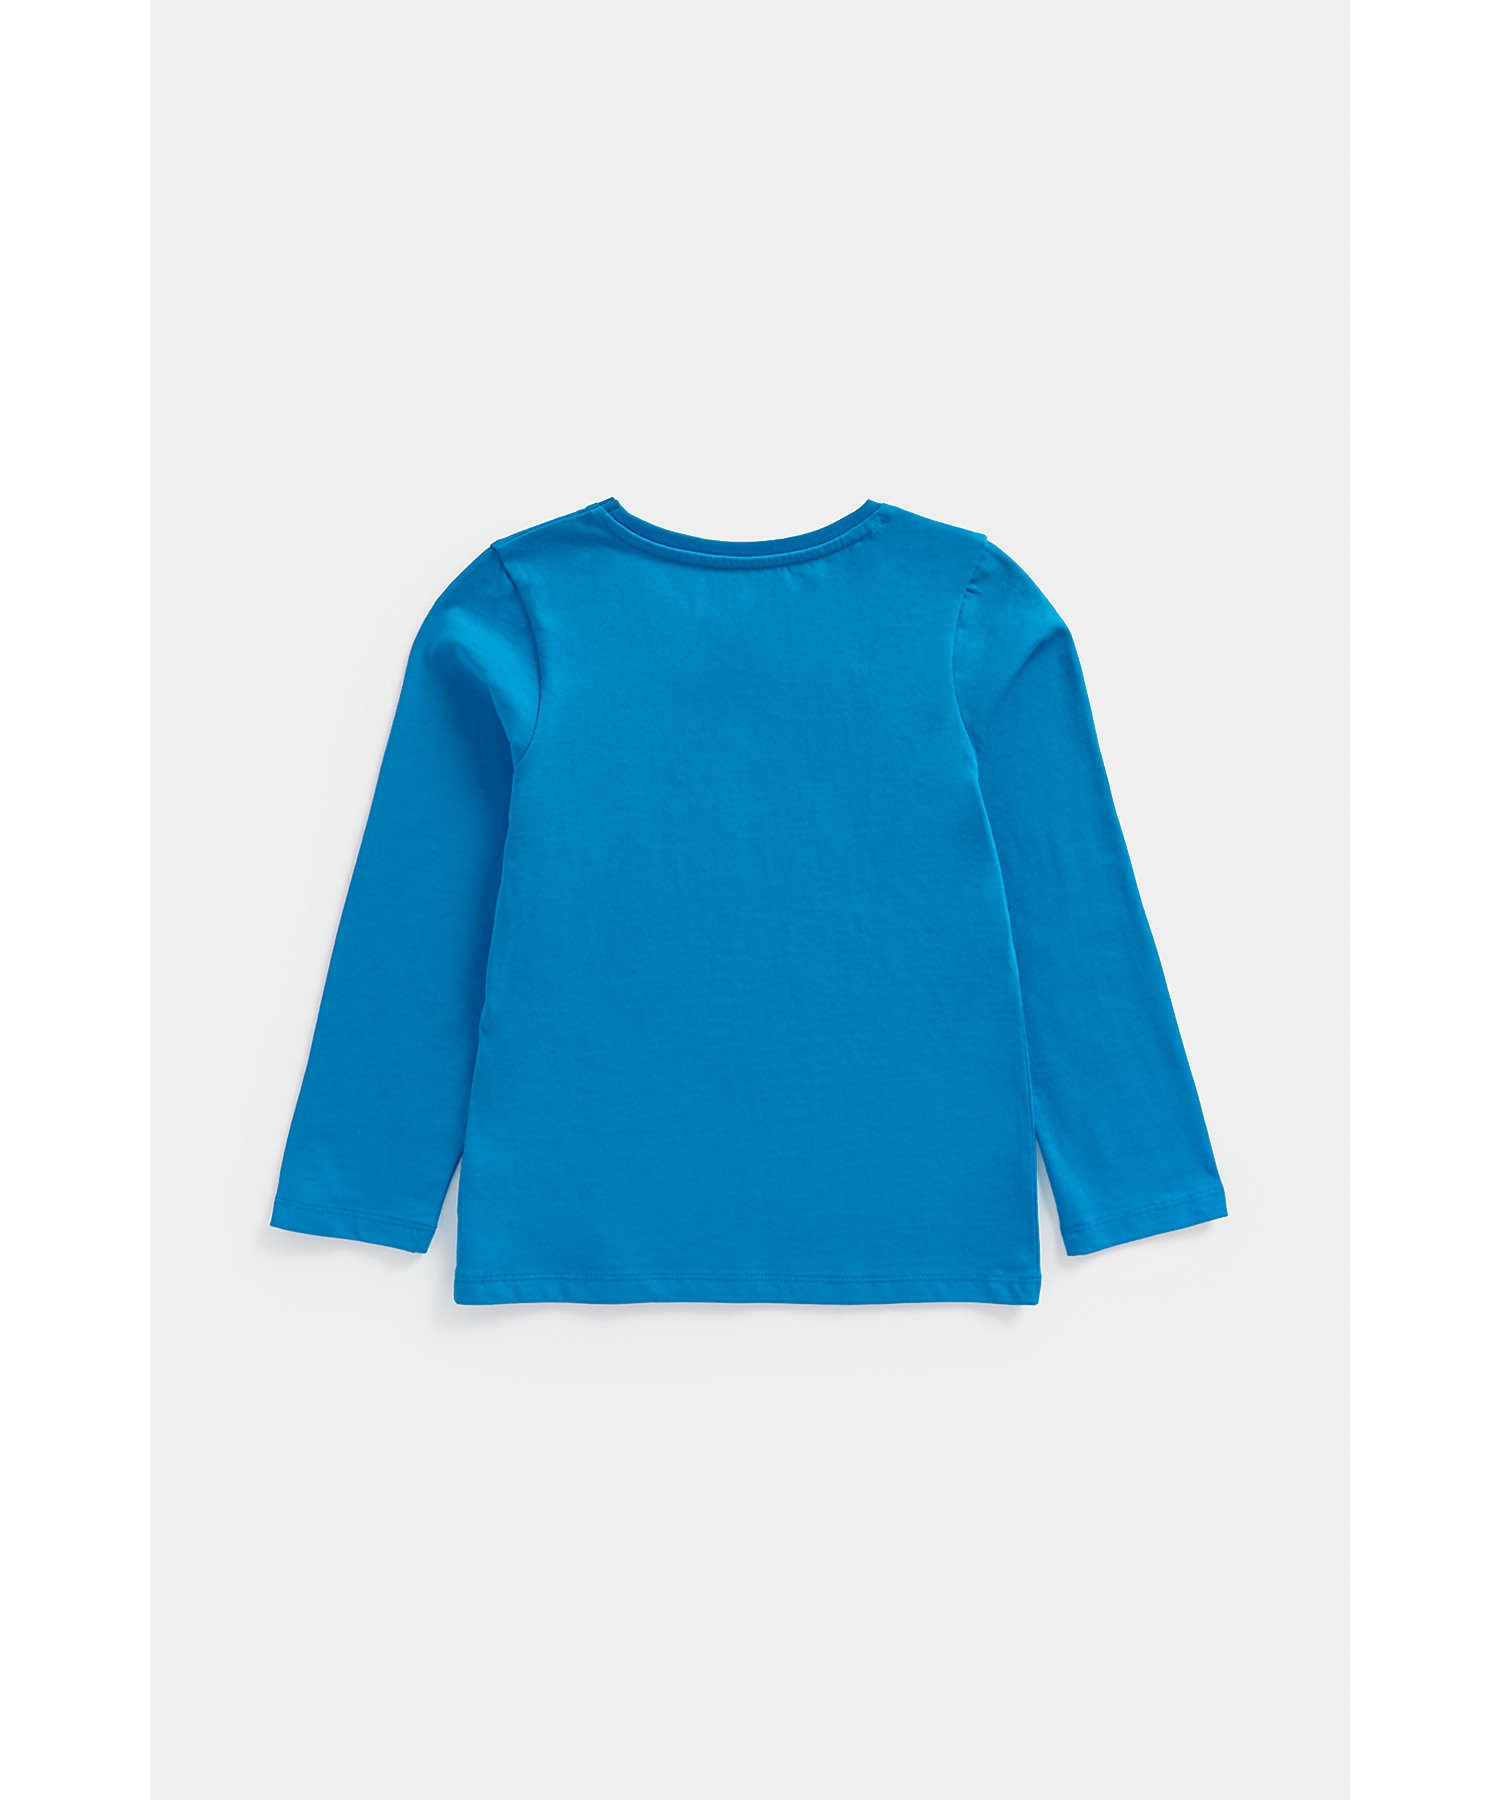 Girls Full Sleeves A-Line Top -Blue